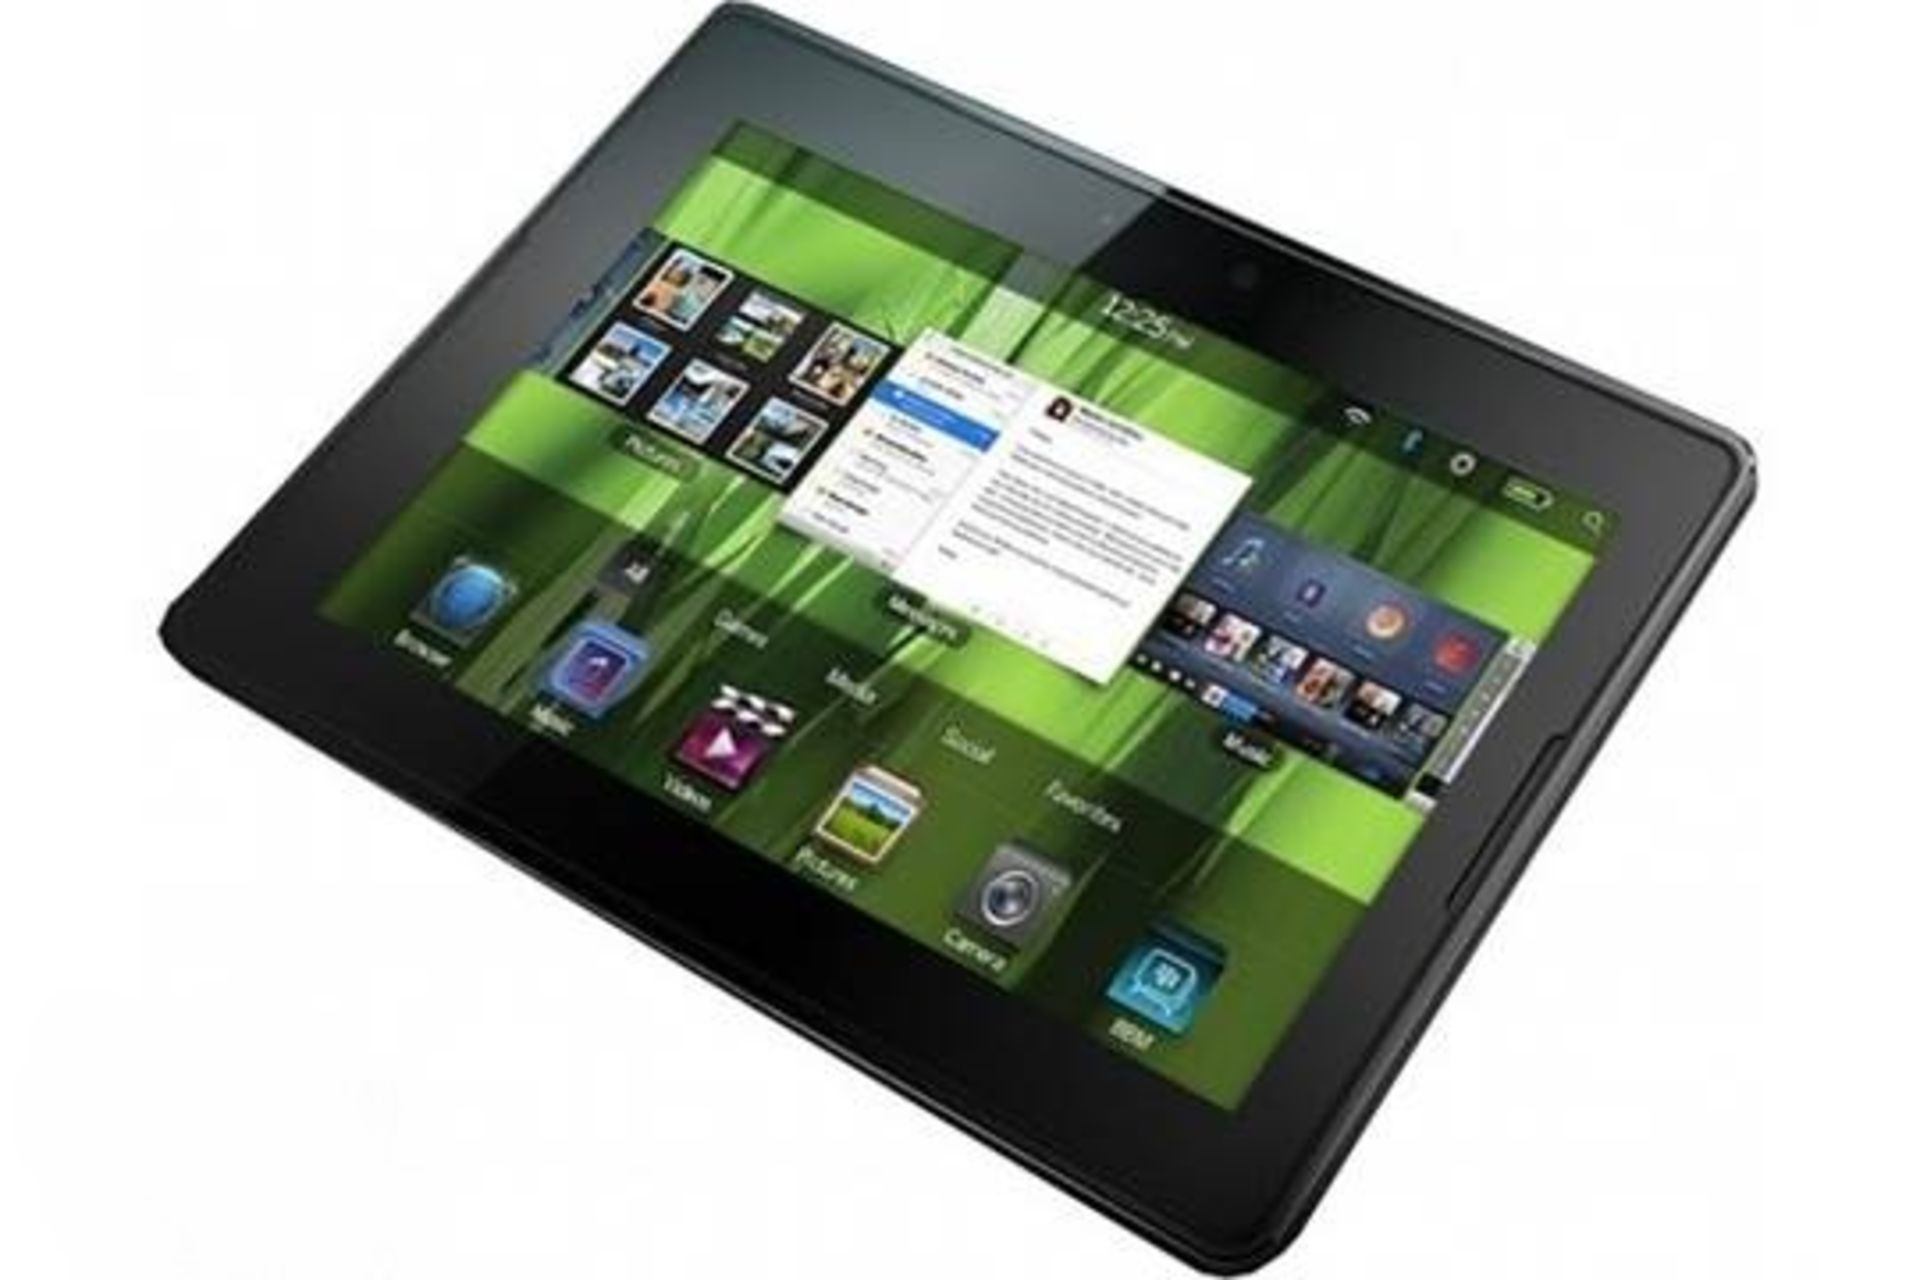 1 x Blackberry Playbook Tablet - 7 Inch Touch Screen - 1ghz Dual Core Processor - 64gb Storage - 1gb